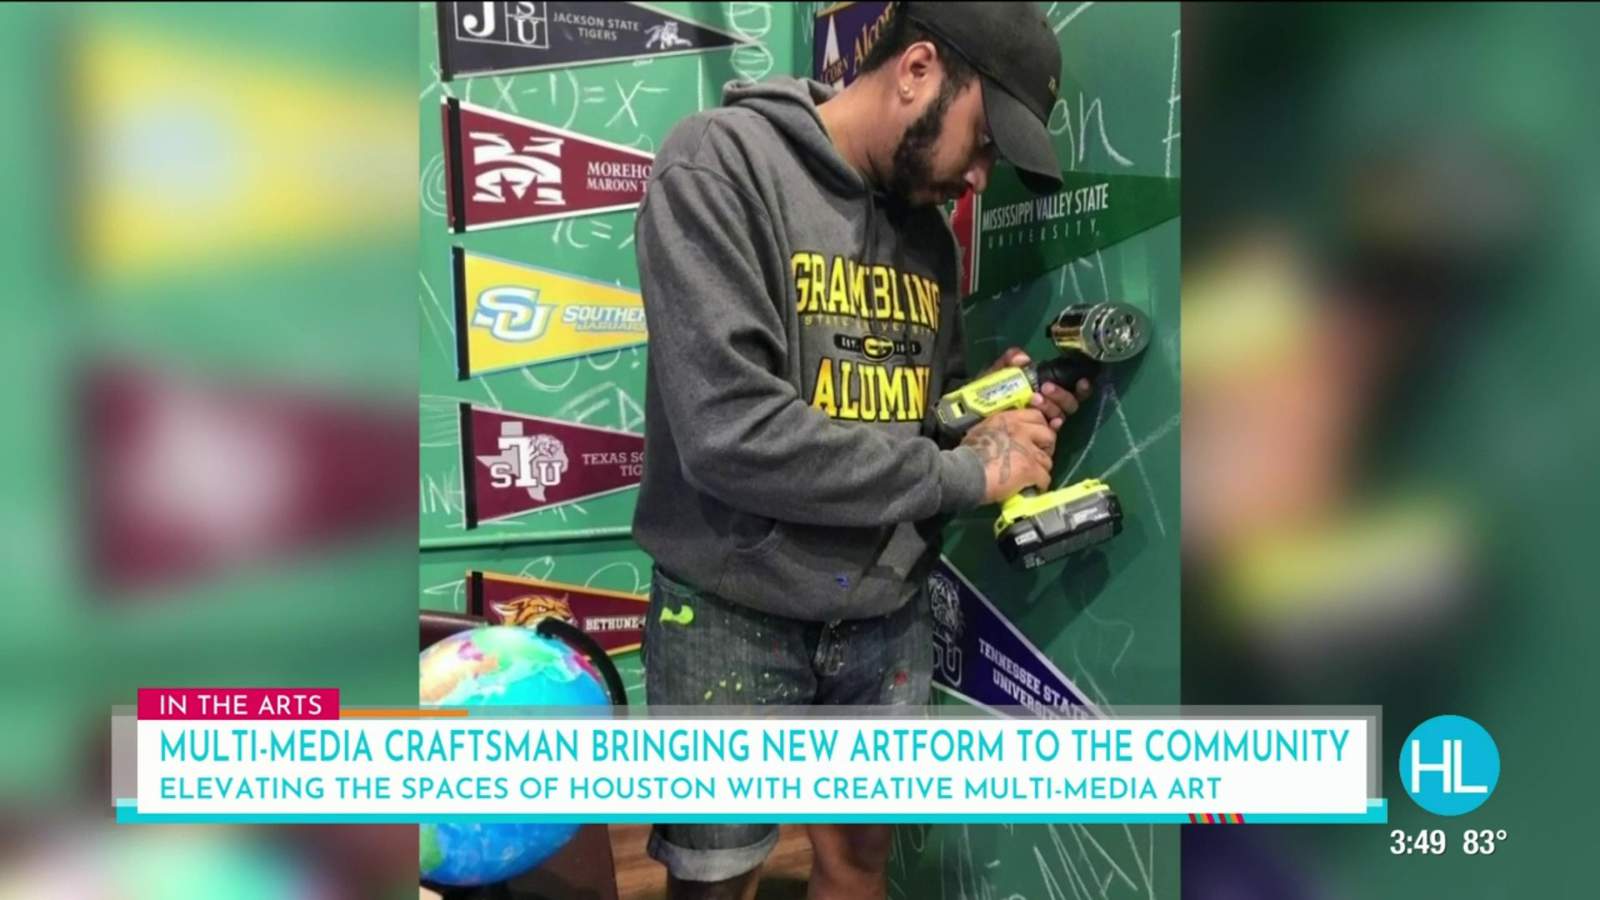 Mixed-Media Artist putting a creative stamp on Houston’s businesses and landmarks